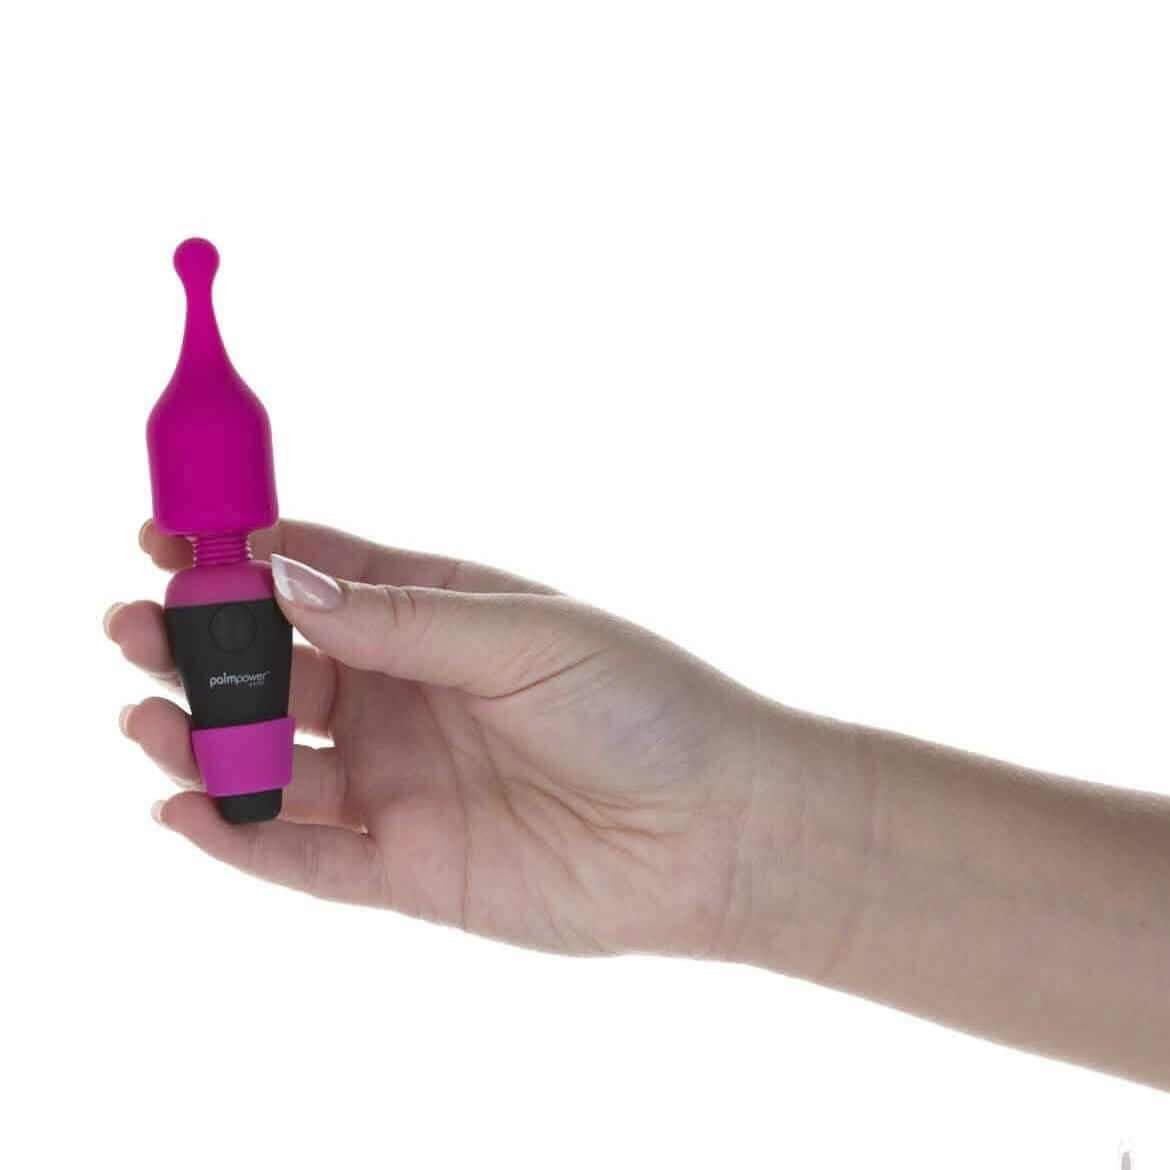 PalmPower Extended Head Attachments - Bunny, Brush, Pawn - Thorn & Feather Sex Toy Canada